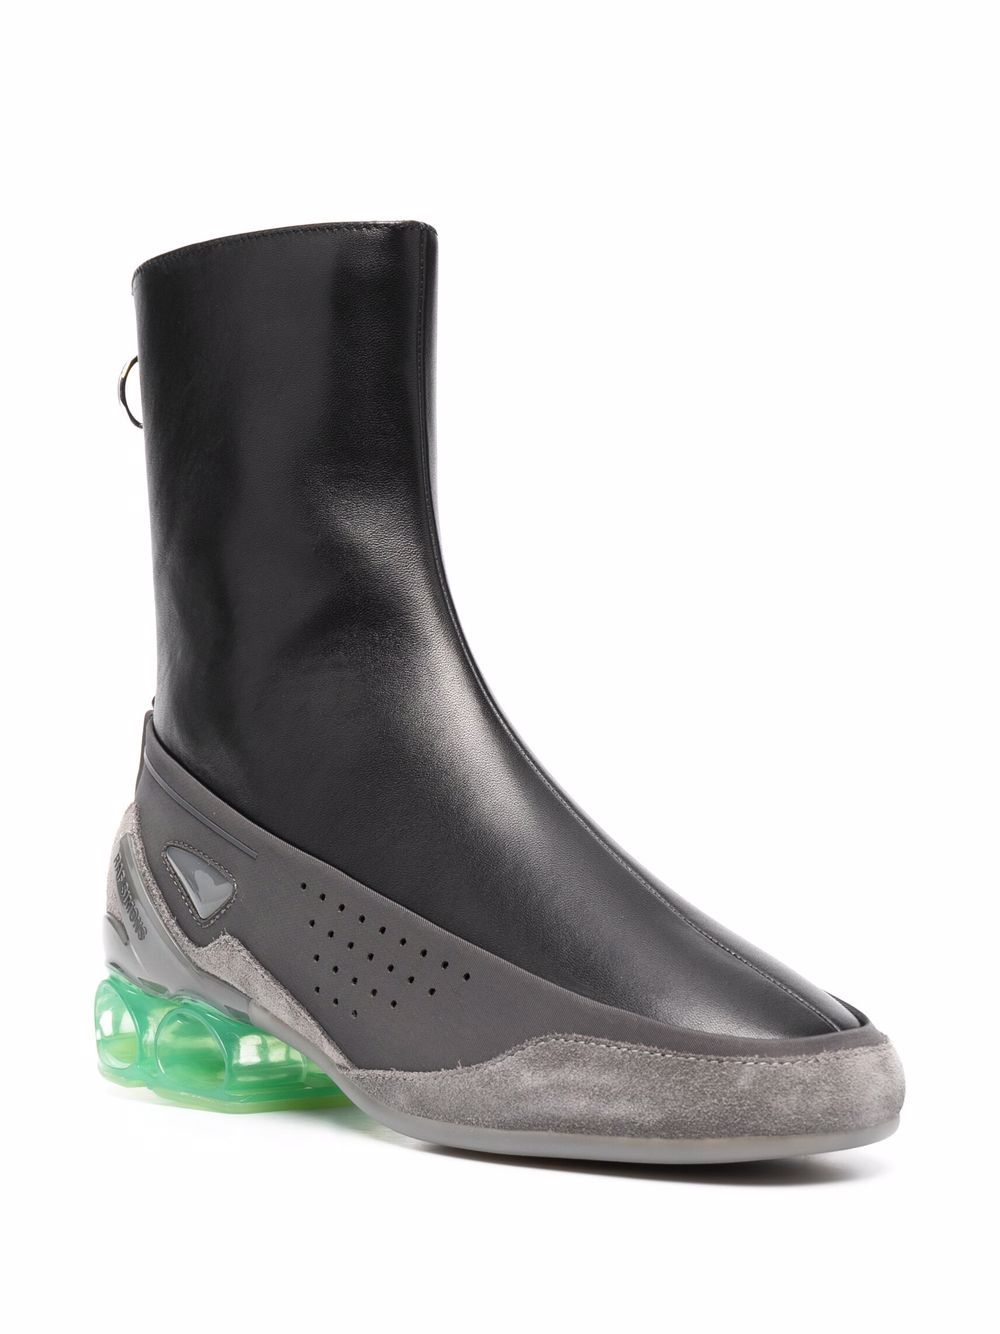 Raf Simons Cycloid 4 Ankle Boots - Farfetch